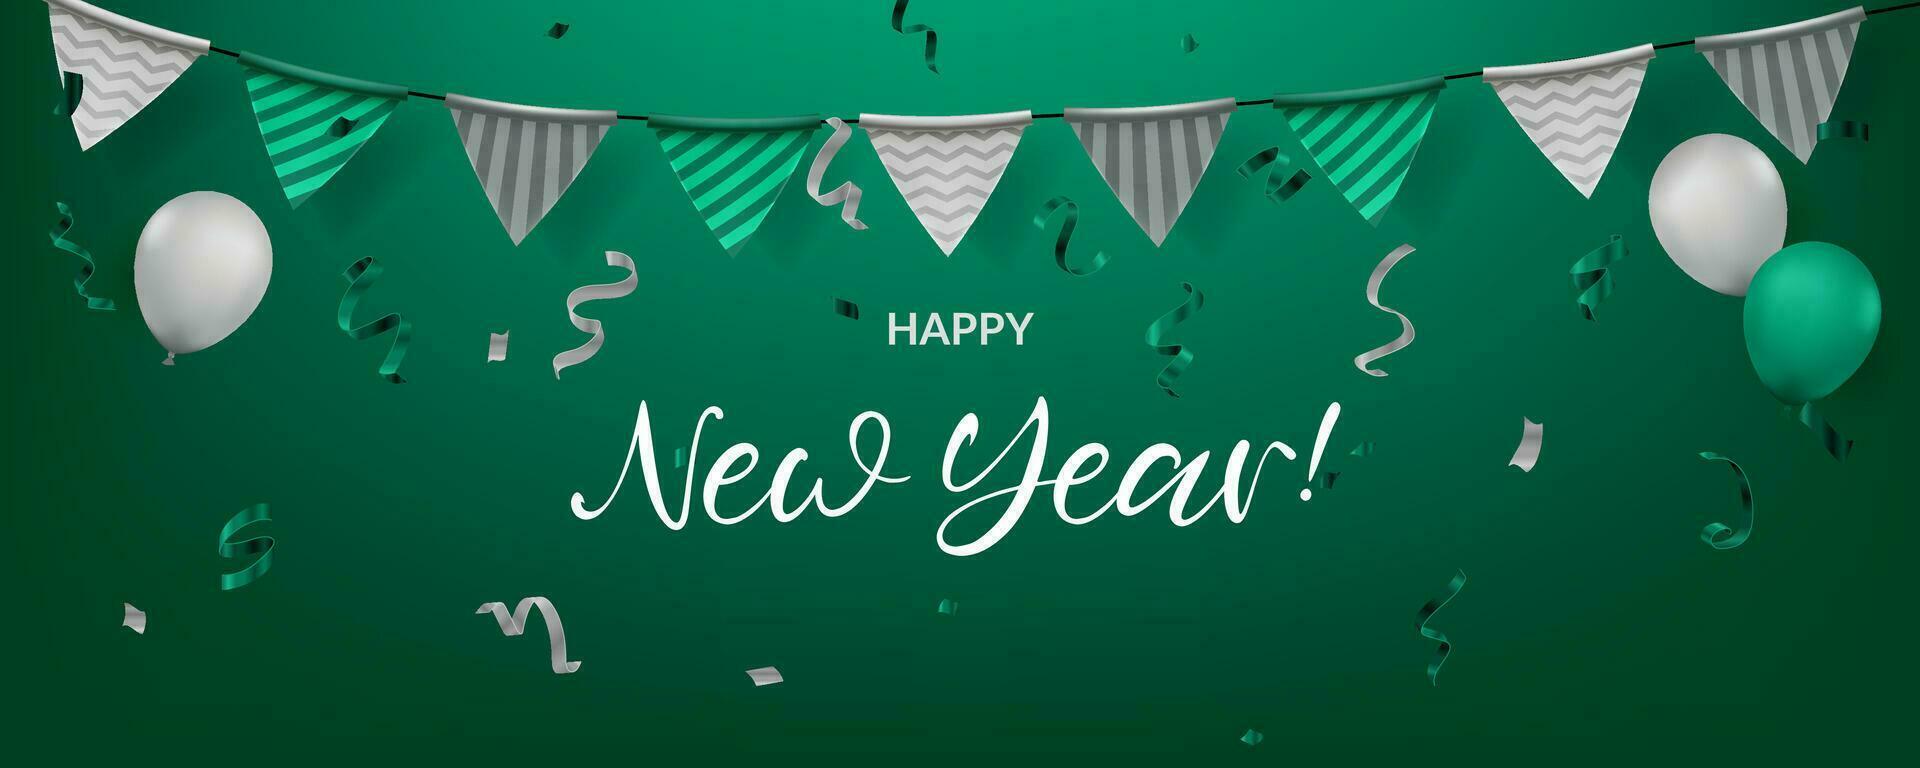 Happy New Year celebration illustration featuring confetti, balloons, green flags, and garland. Suitable for various celebrations such as birthdays, anniversaries, and events. Not AI generated. vector